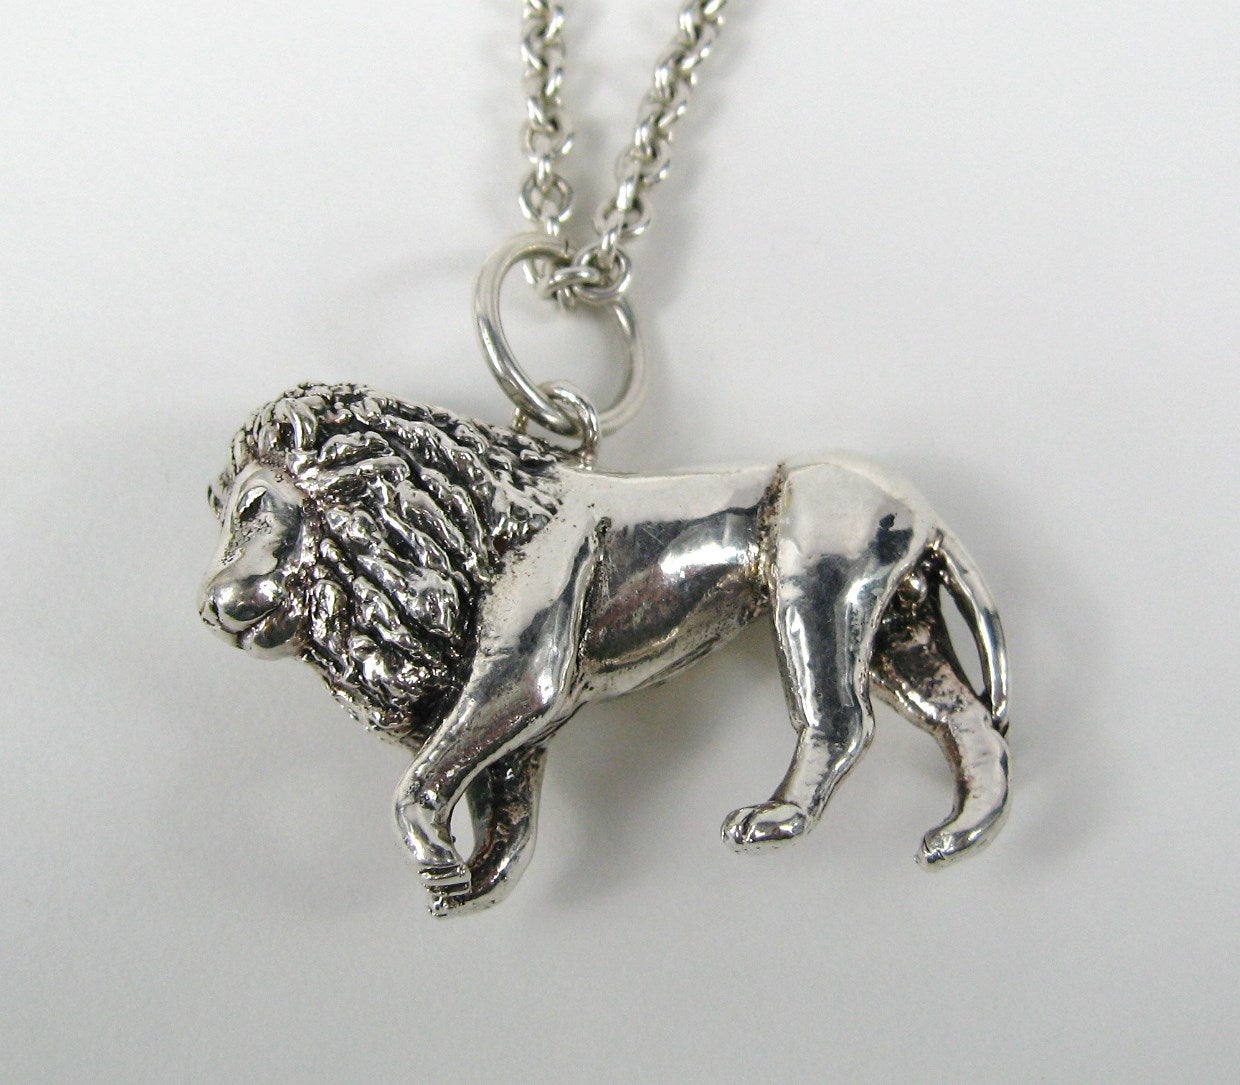 The Early work of New Mexico silversmith Carol Felley rarely comes along and when it does, it's a thrill because her designs are so amazing. This sterling silver necklace is stunning
3-D Figural Lion 
Early 1990s
Hallmarked CF
measuring
Chain